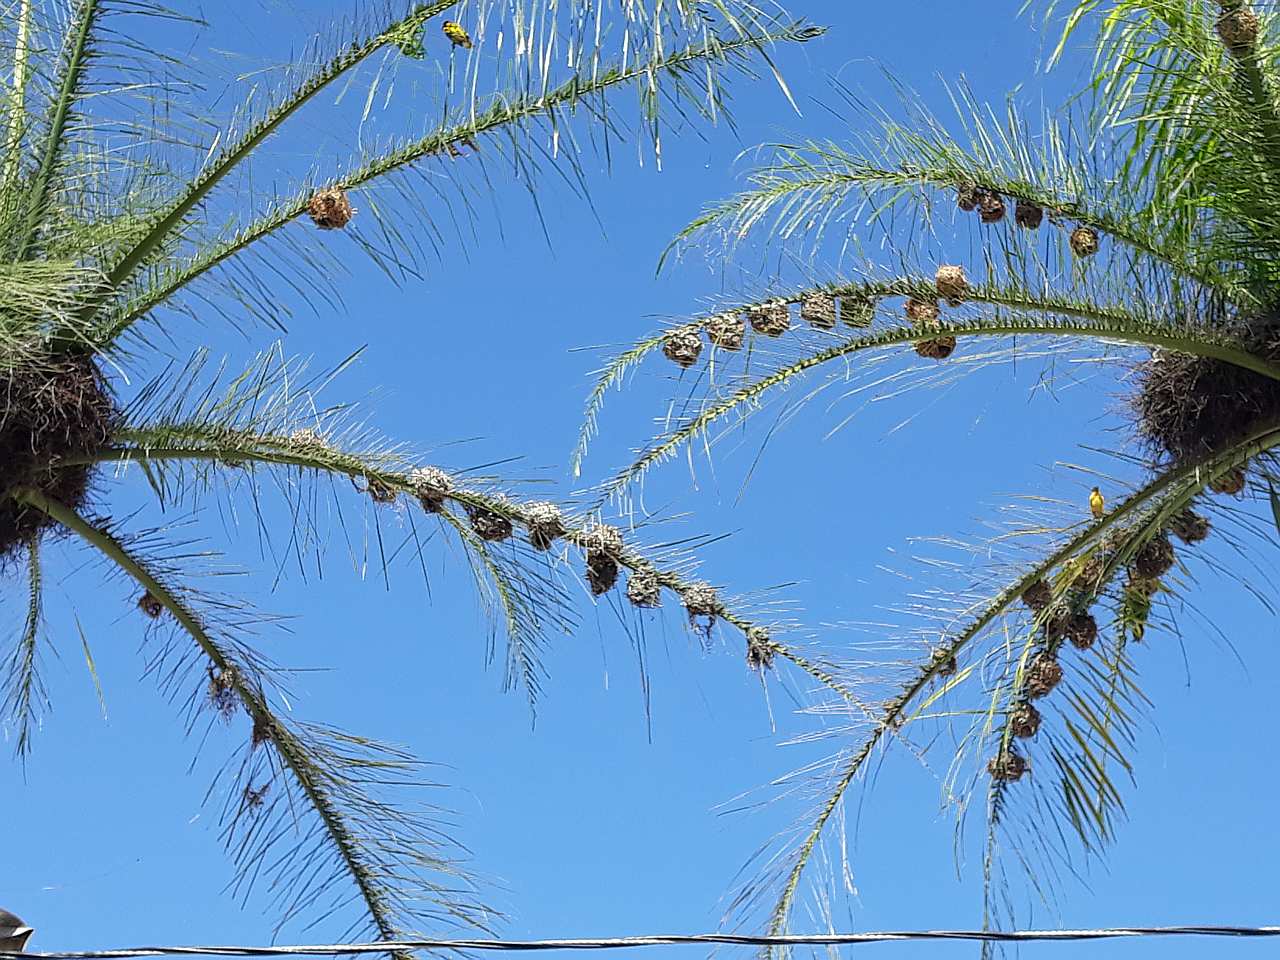 Rare bird nests on palm leafs, right next to the boats